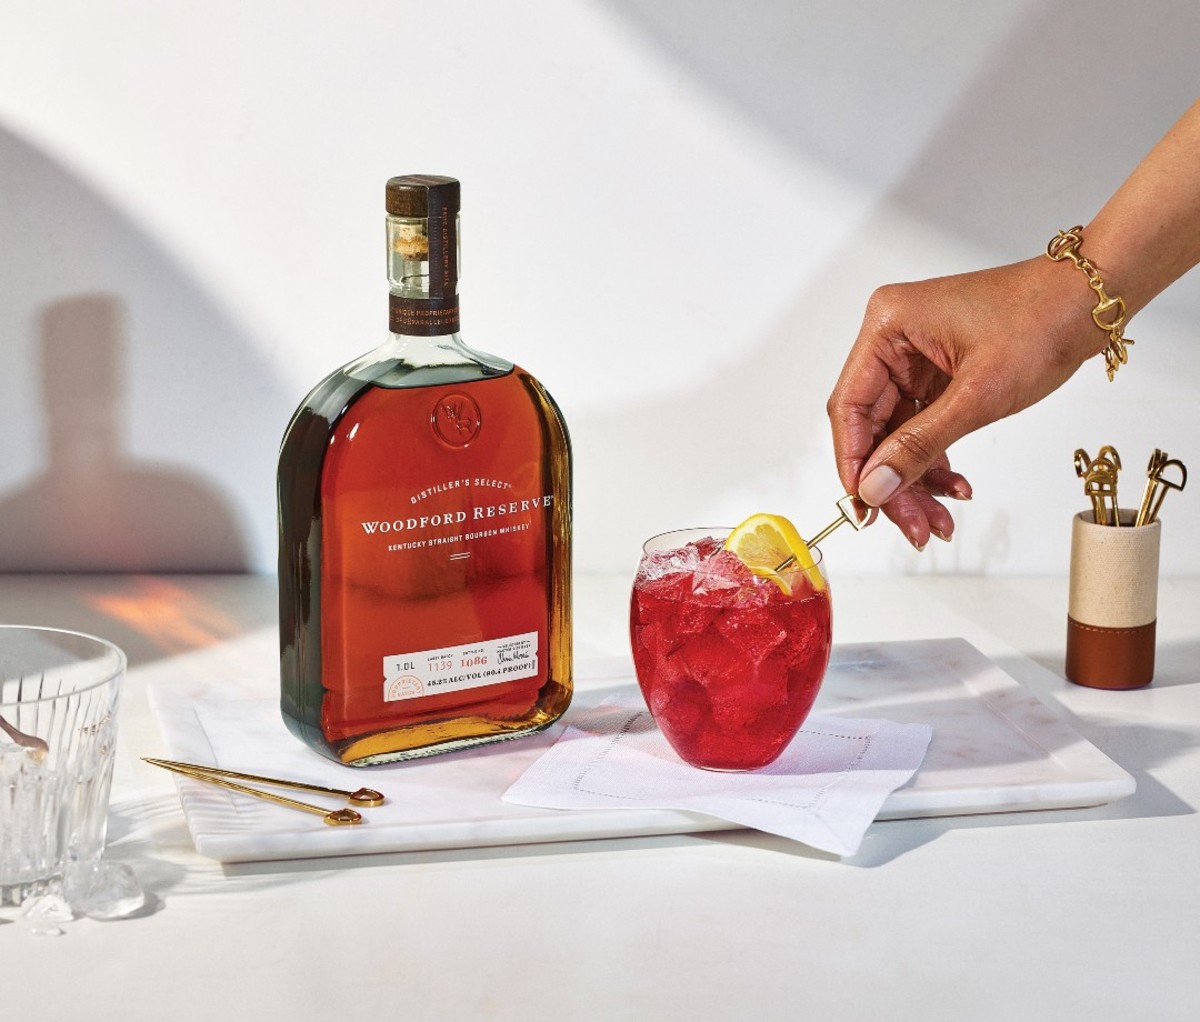 Bottle of Woodford Reserve next to cocktail